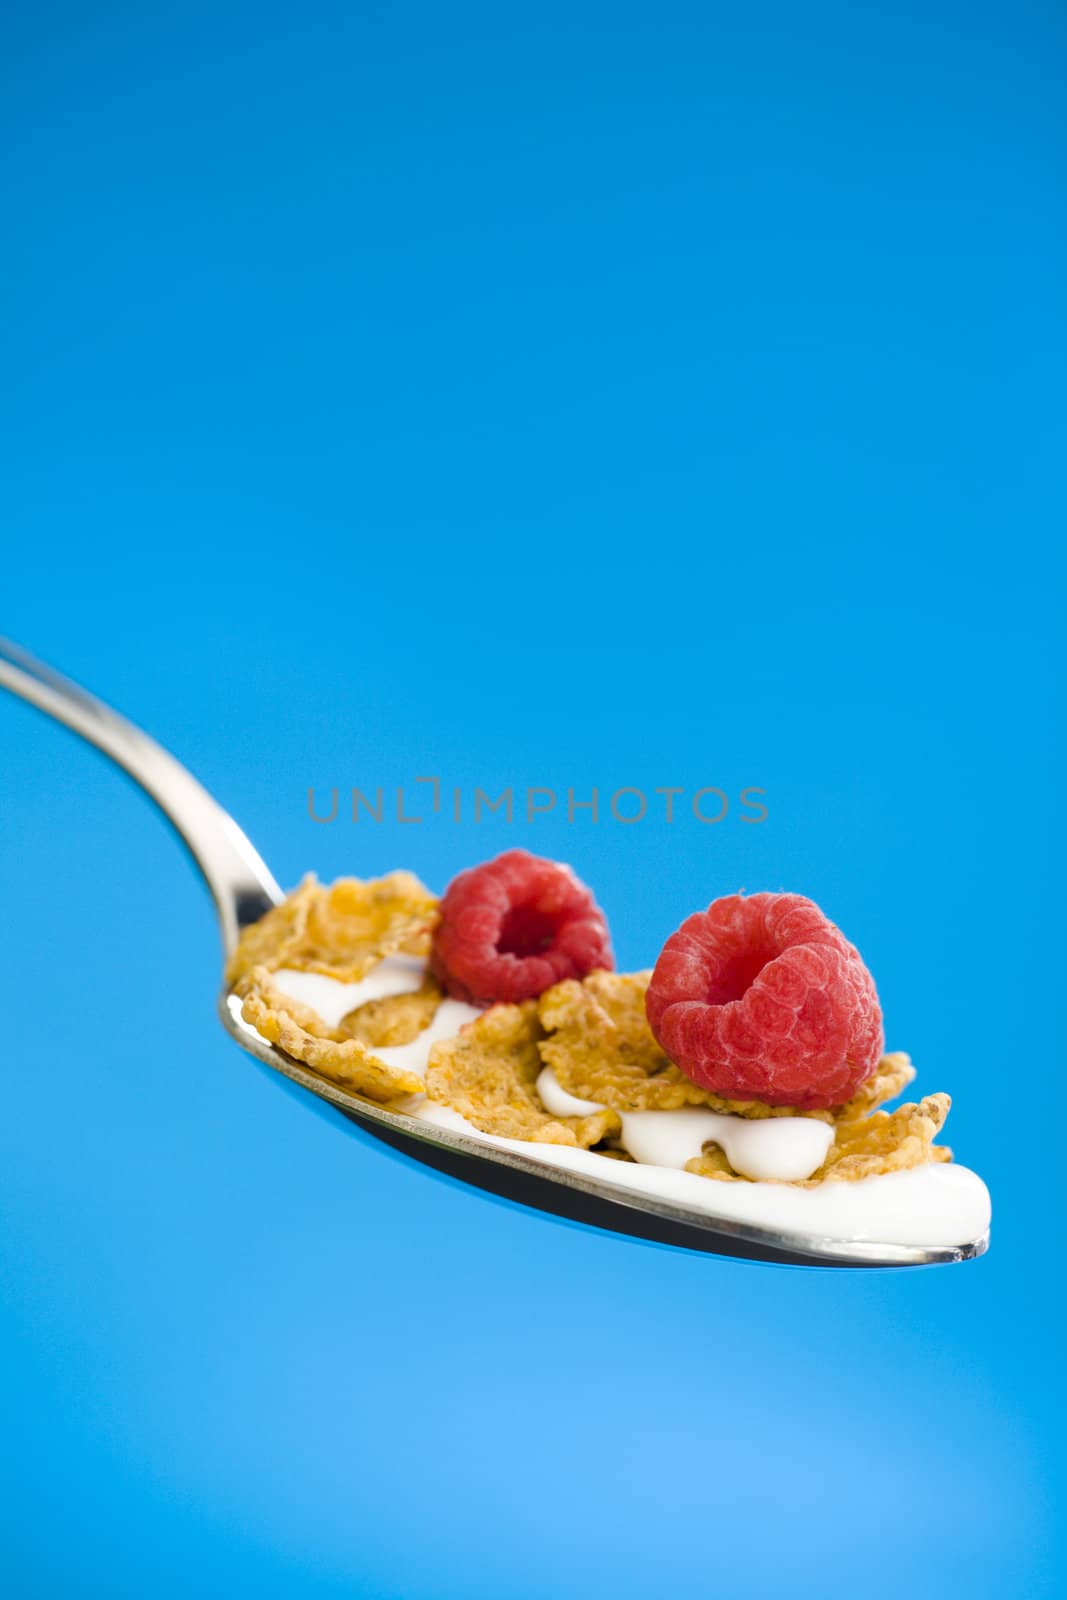 Corn flakes on the spoon by mjp